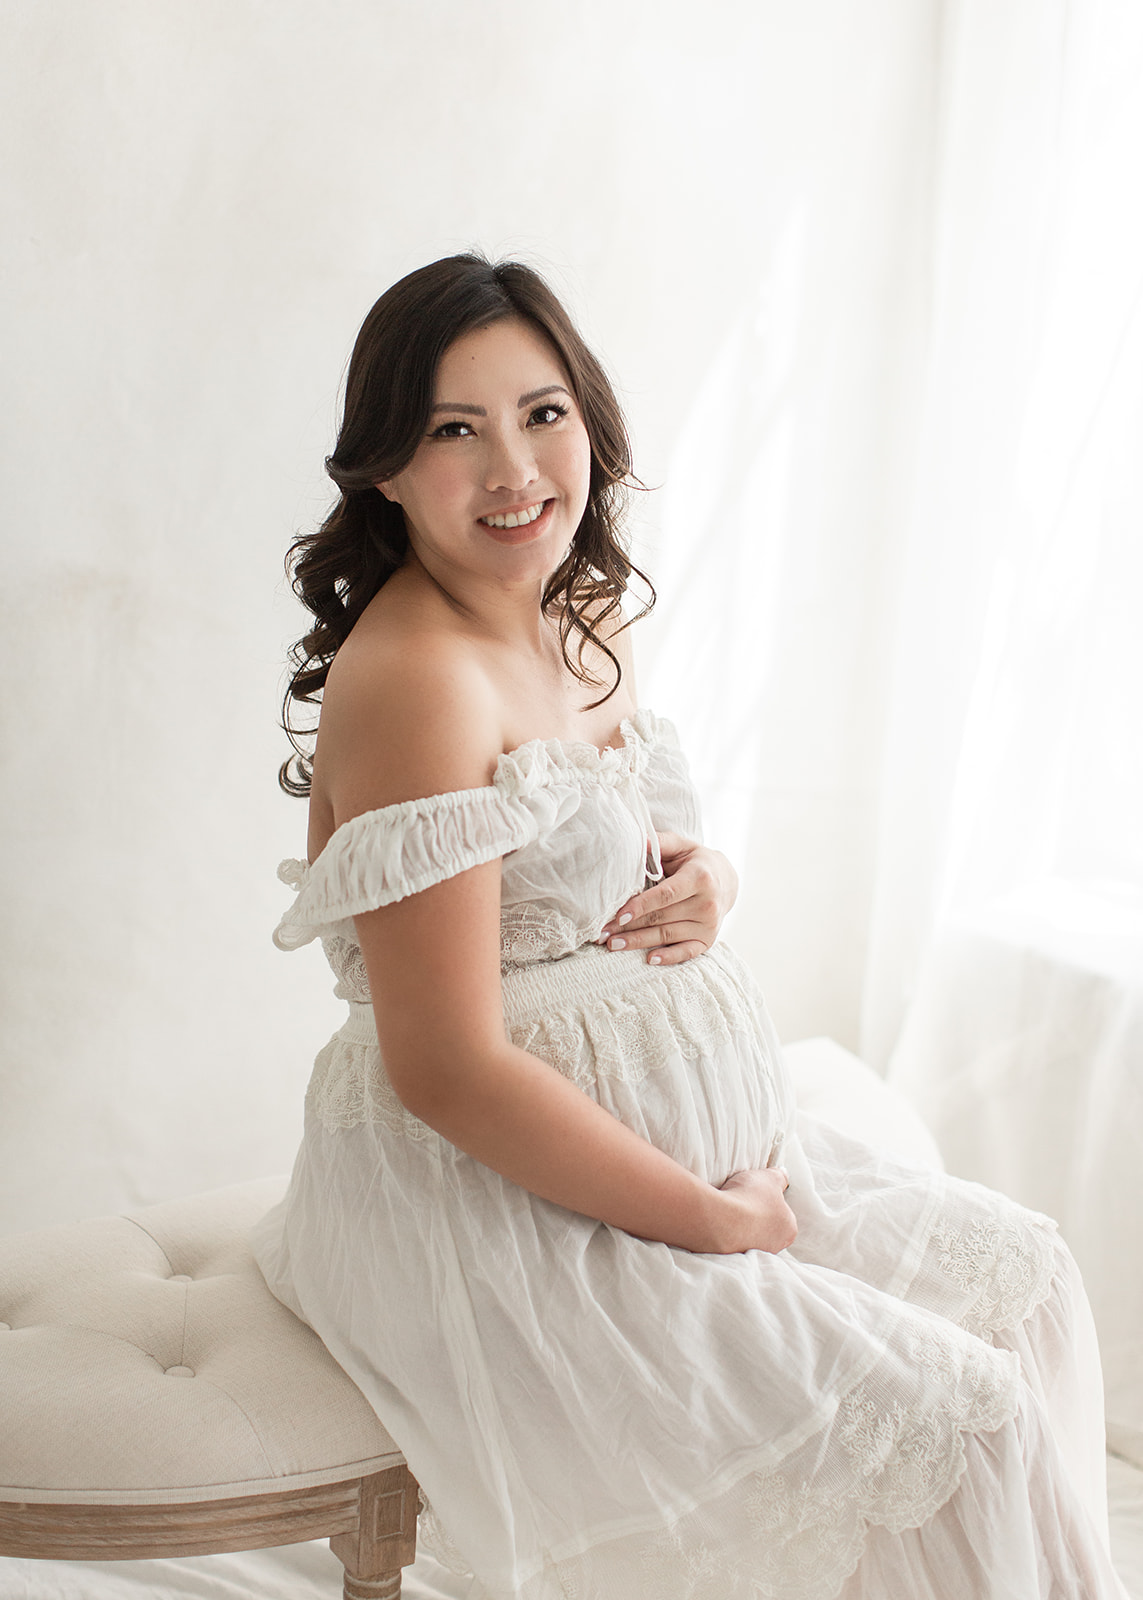 A mother to be sits by a window on an antique bench in a white maternity dress